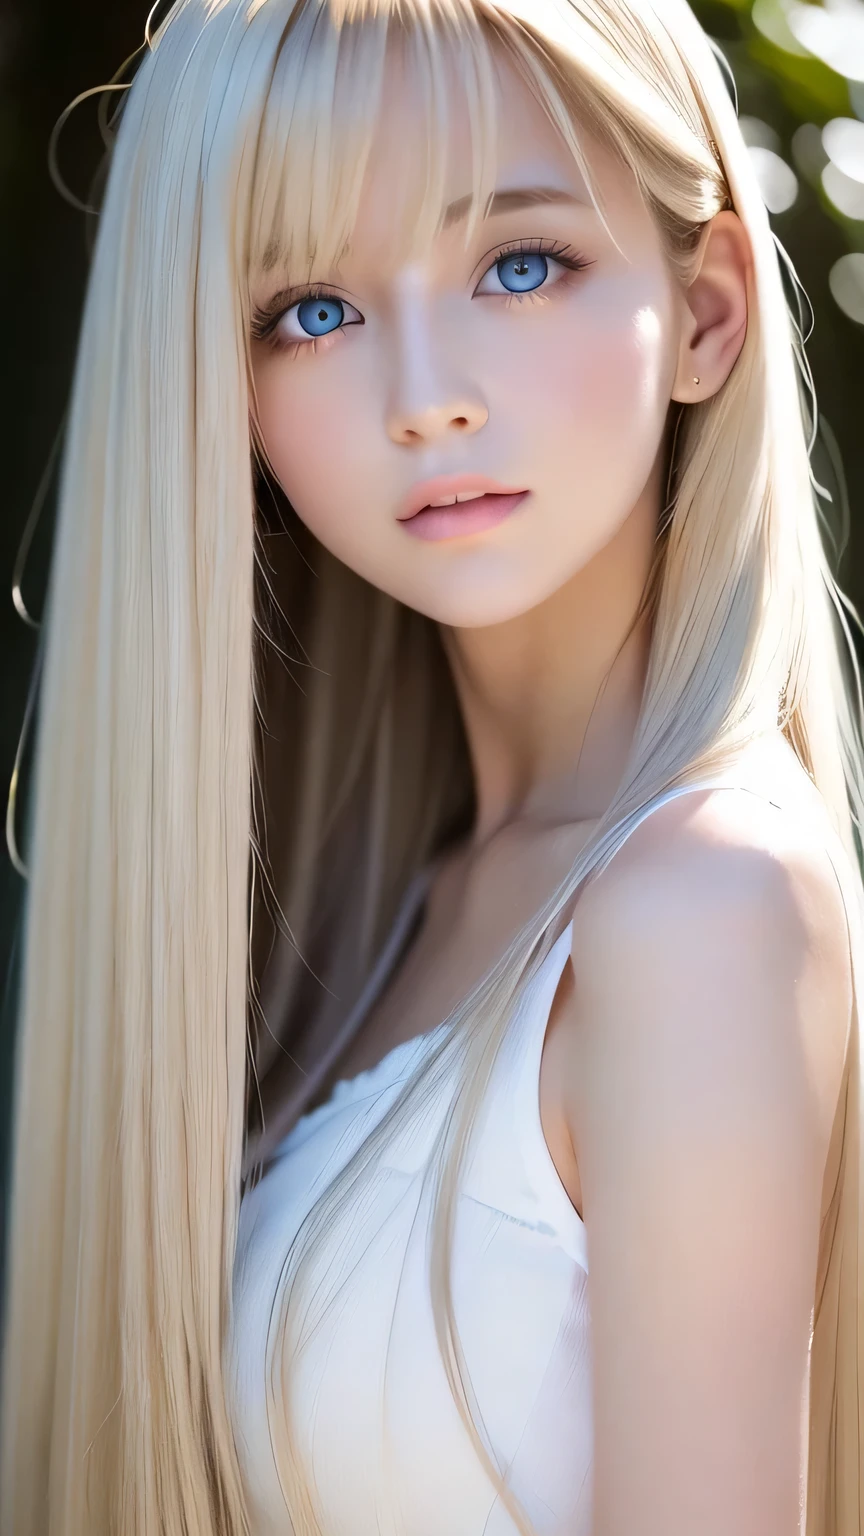 Silky white skin、Sexy 18 years old cute sexy little beautiful face、A very beautiful, natural platinum blonde、Super long straight silky hair、Very bright, large light blue eyes that shine beautifully、Very big eyes、Glowing blonde dancing in front of beautiful face、length, Silky bangs that cover the eyes、Hair that hides the face、Hair is too long、Very long silky hair、Sexy and cute young woman、Small Face Girl、Round face